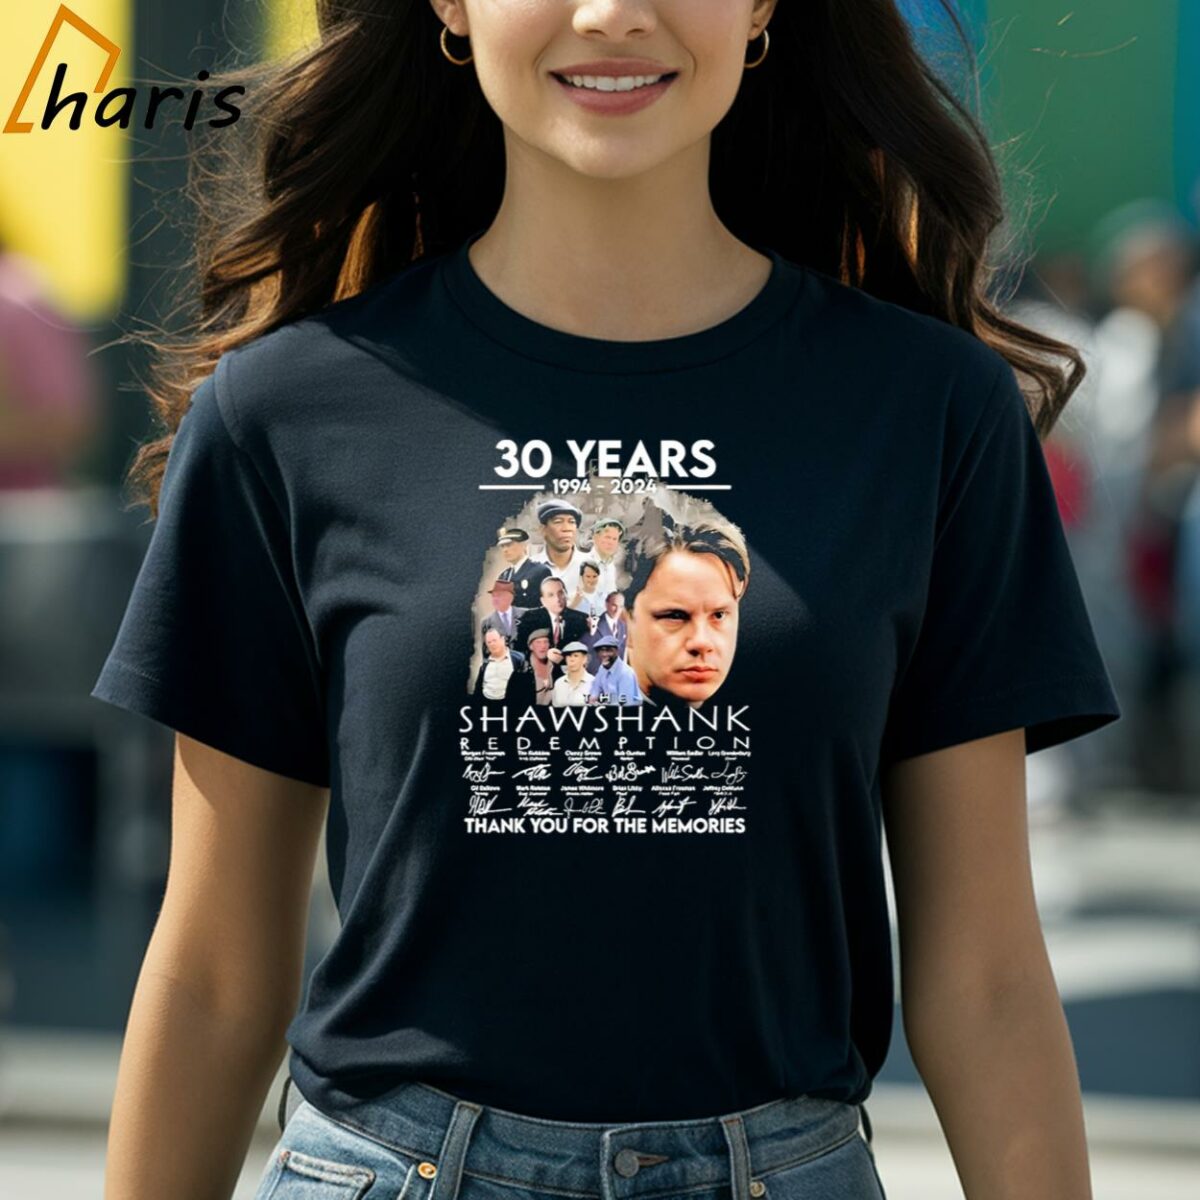 30 Years 1994 2024 The Shawshank Redemption Members Thank You For The Memories T Shirt 2 Shirt